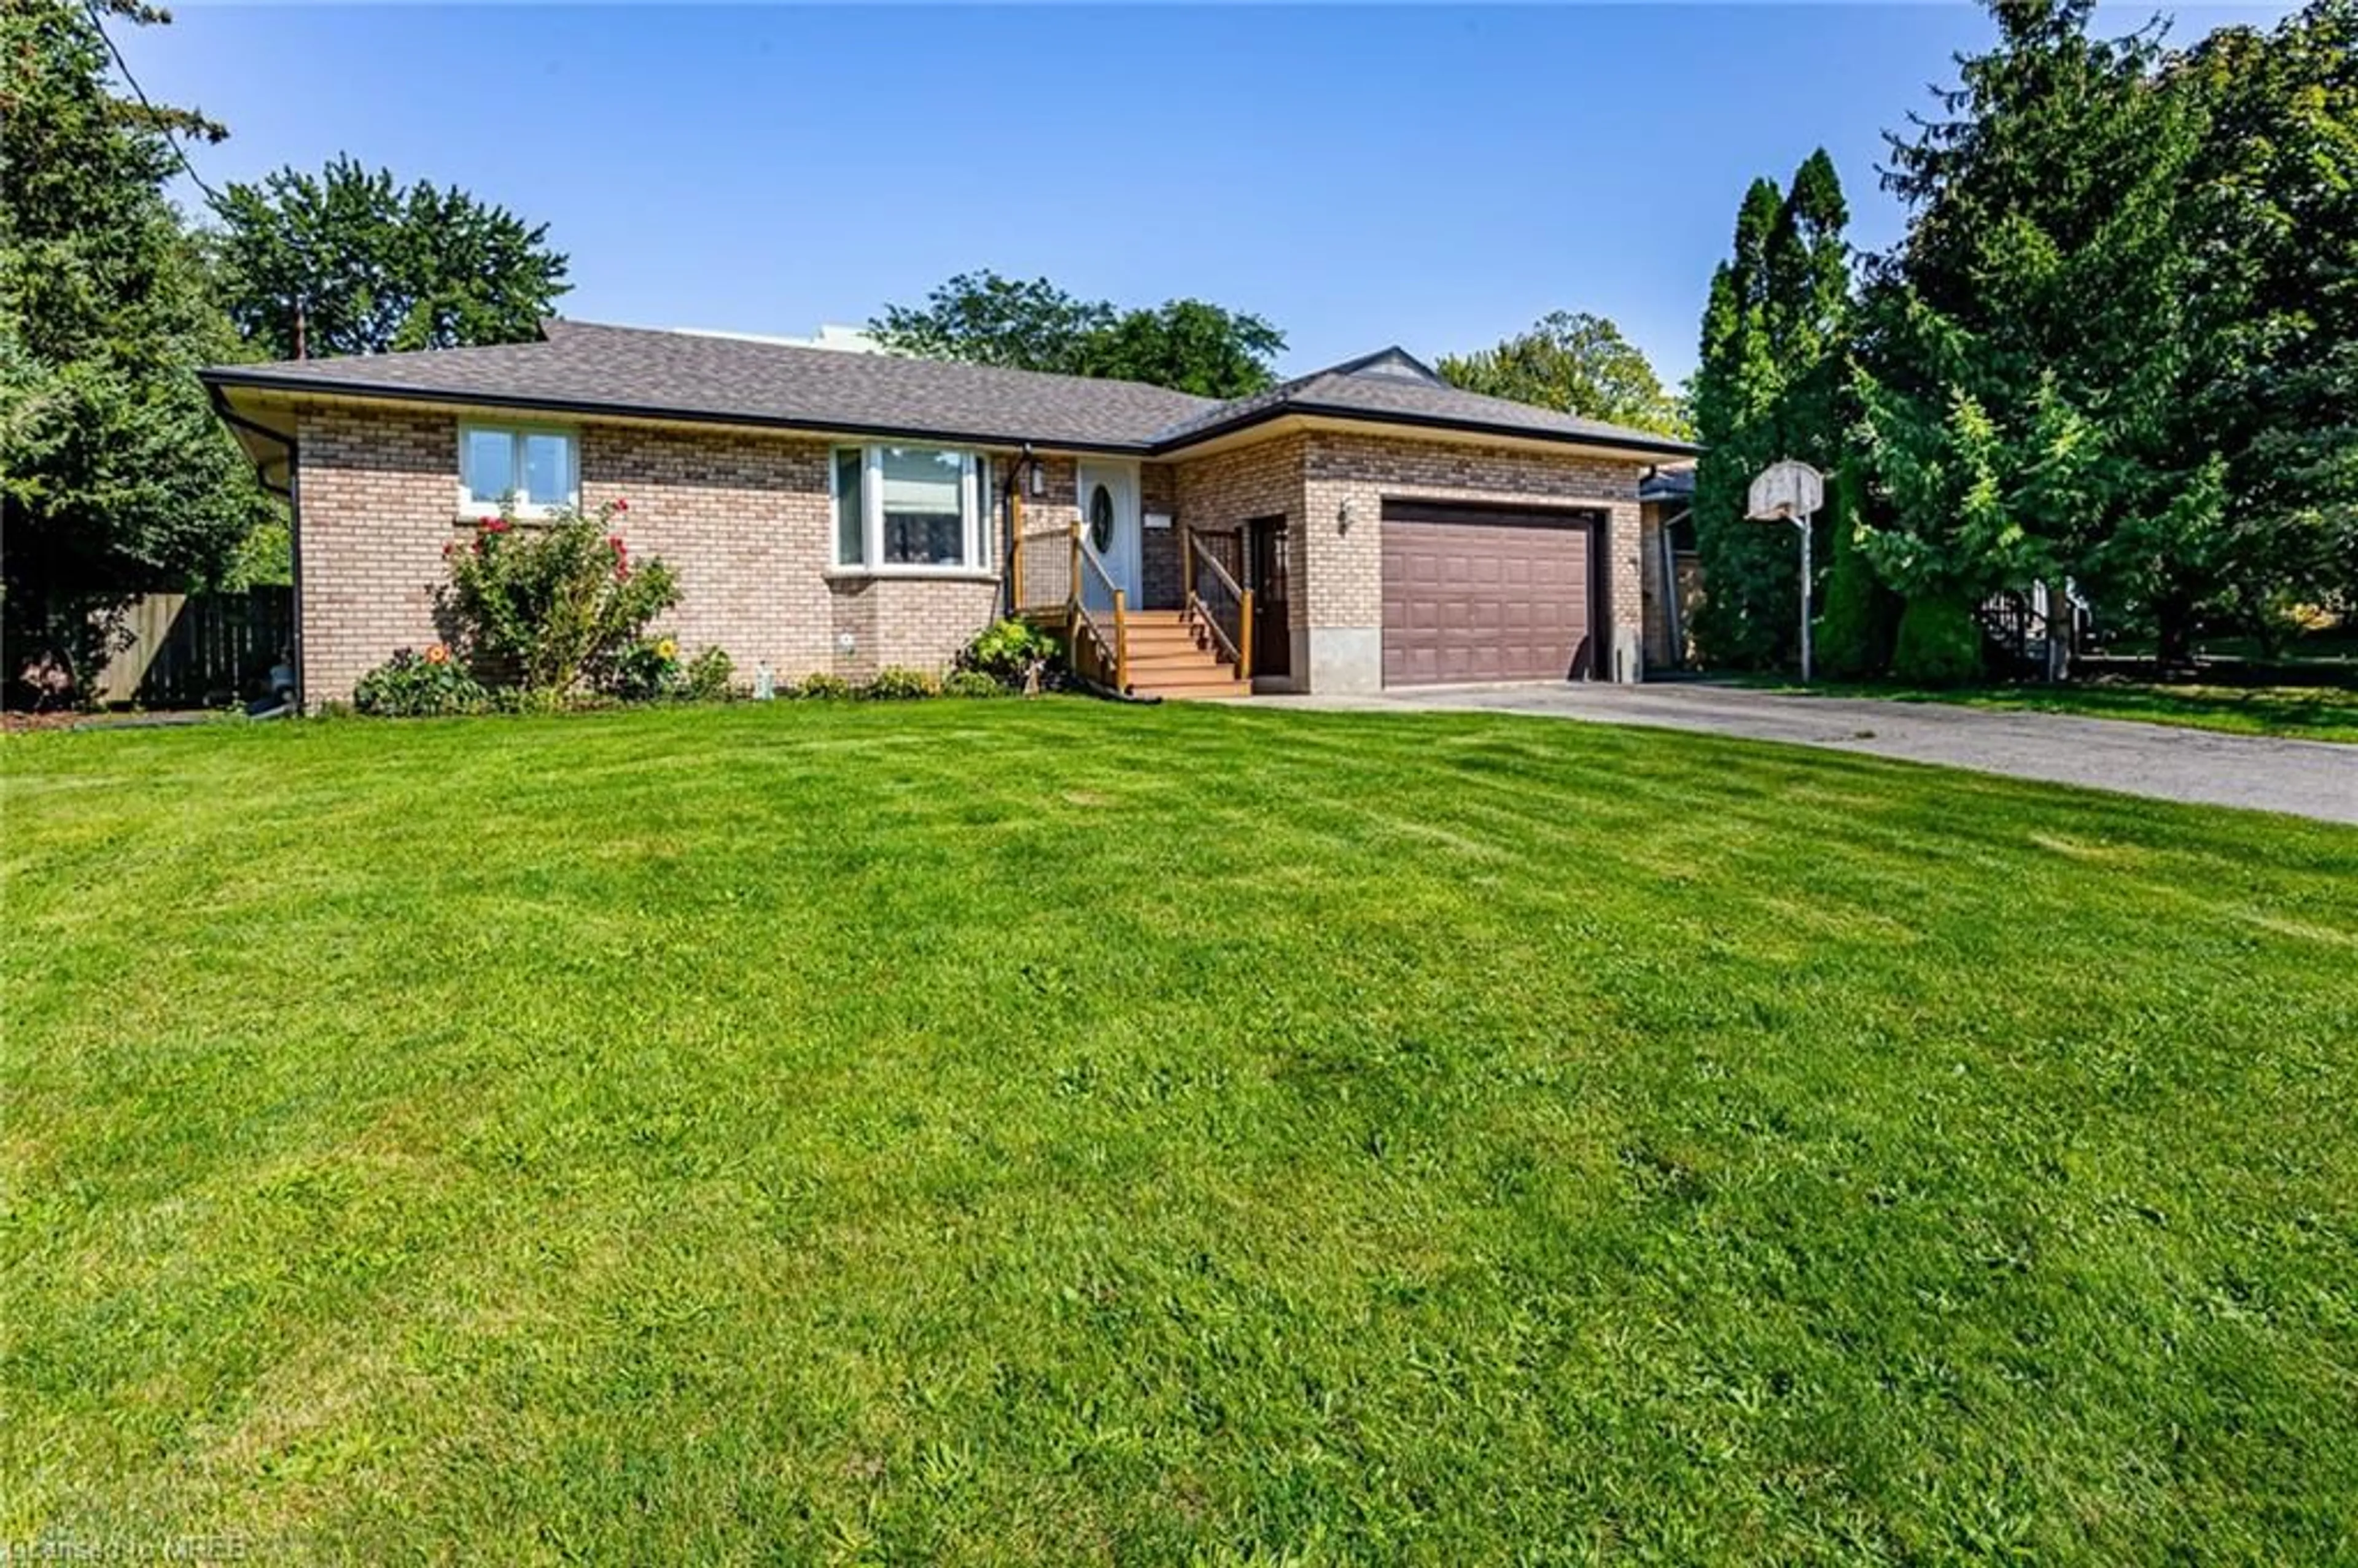 Frontside or backside of a home for 594 Gordon Ave, London Ontario N6J 2W2